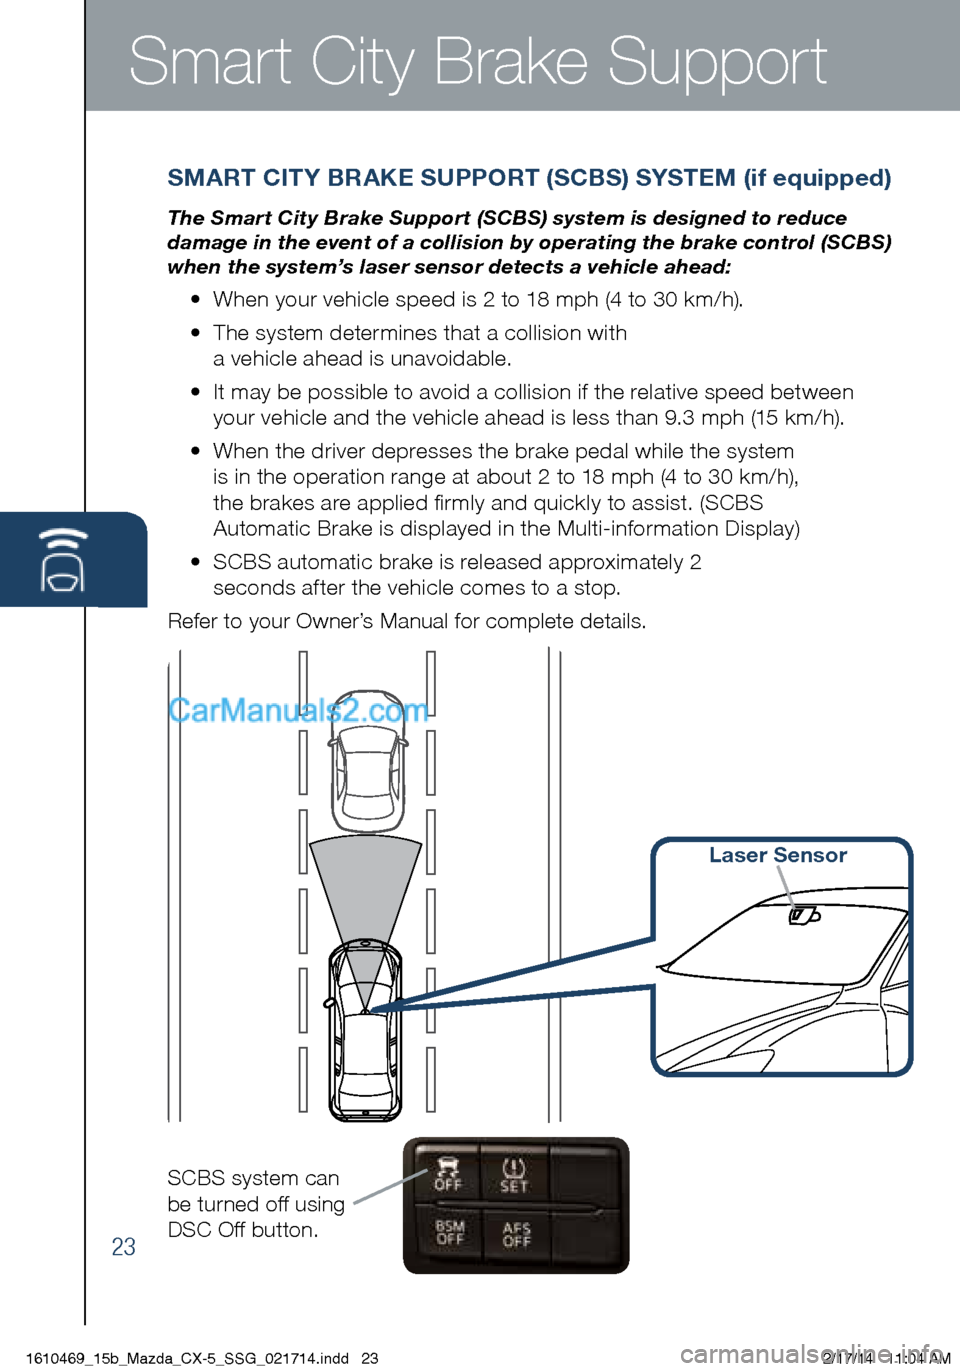 MAZDA MODEL CX-5 2015  Smart Start Guide (in English) Smart City Brake Support
SMART CITY BRAKE SUPPORT (SCBS) SYSTEM (if equipped)
The Smart City Brake Support (SCBS) system is designed to reduce 
damage in the event of a collision by operating the brak